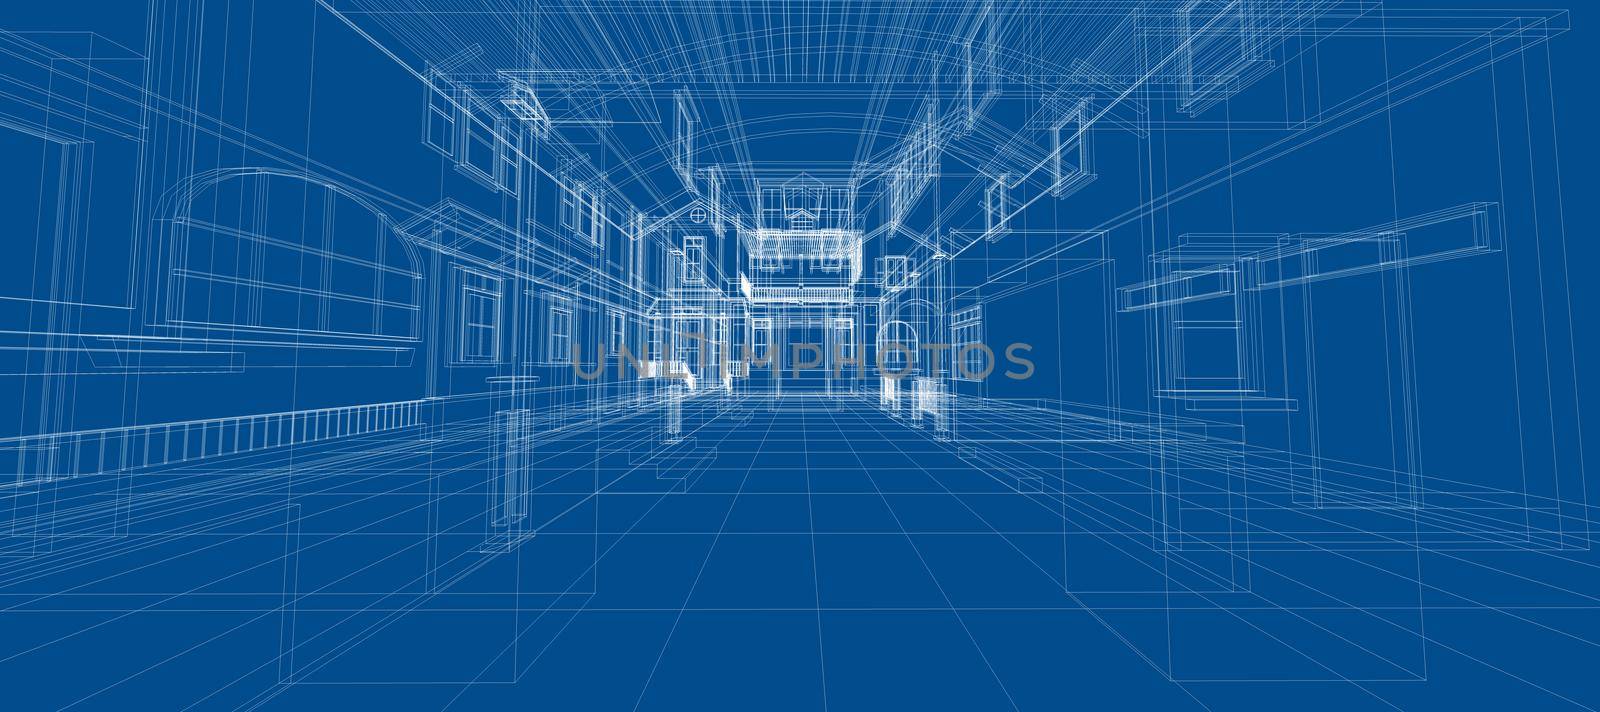 Smart house automation system digital intelligent technology abstract background architecture interior 3d wireframe construction on blue background by Petrichor